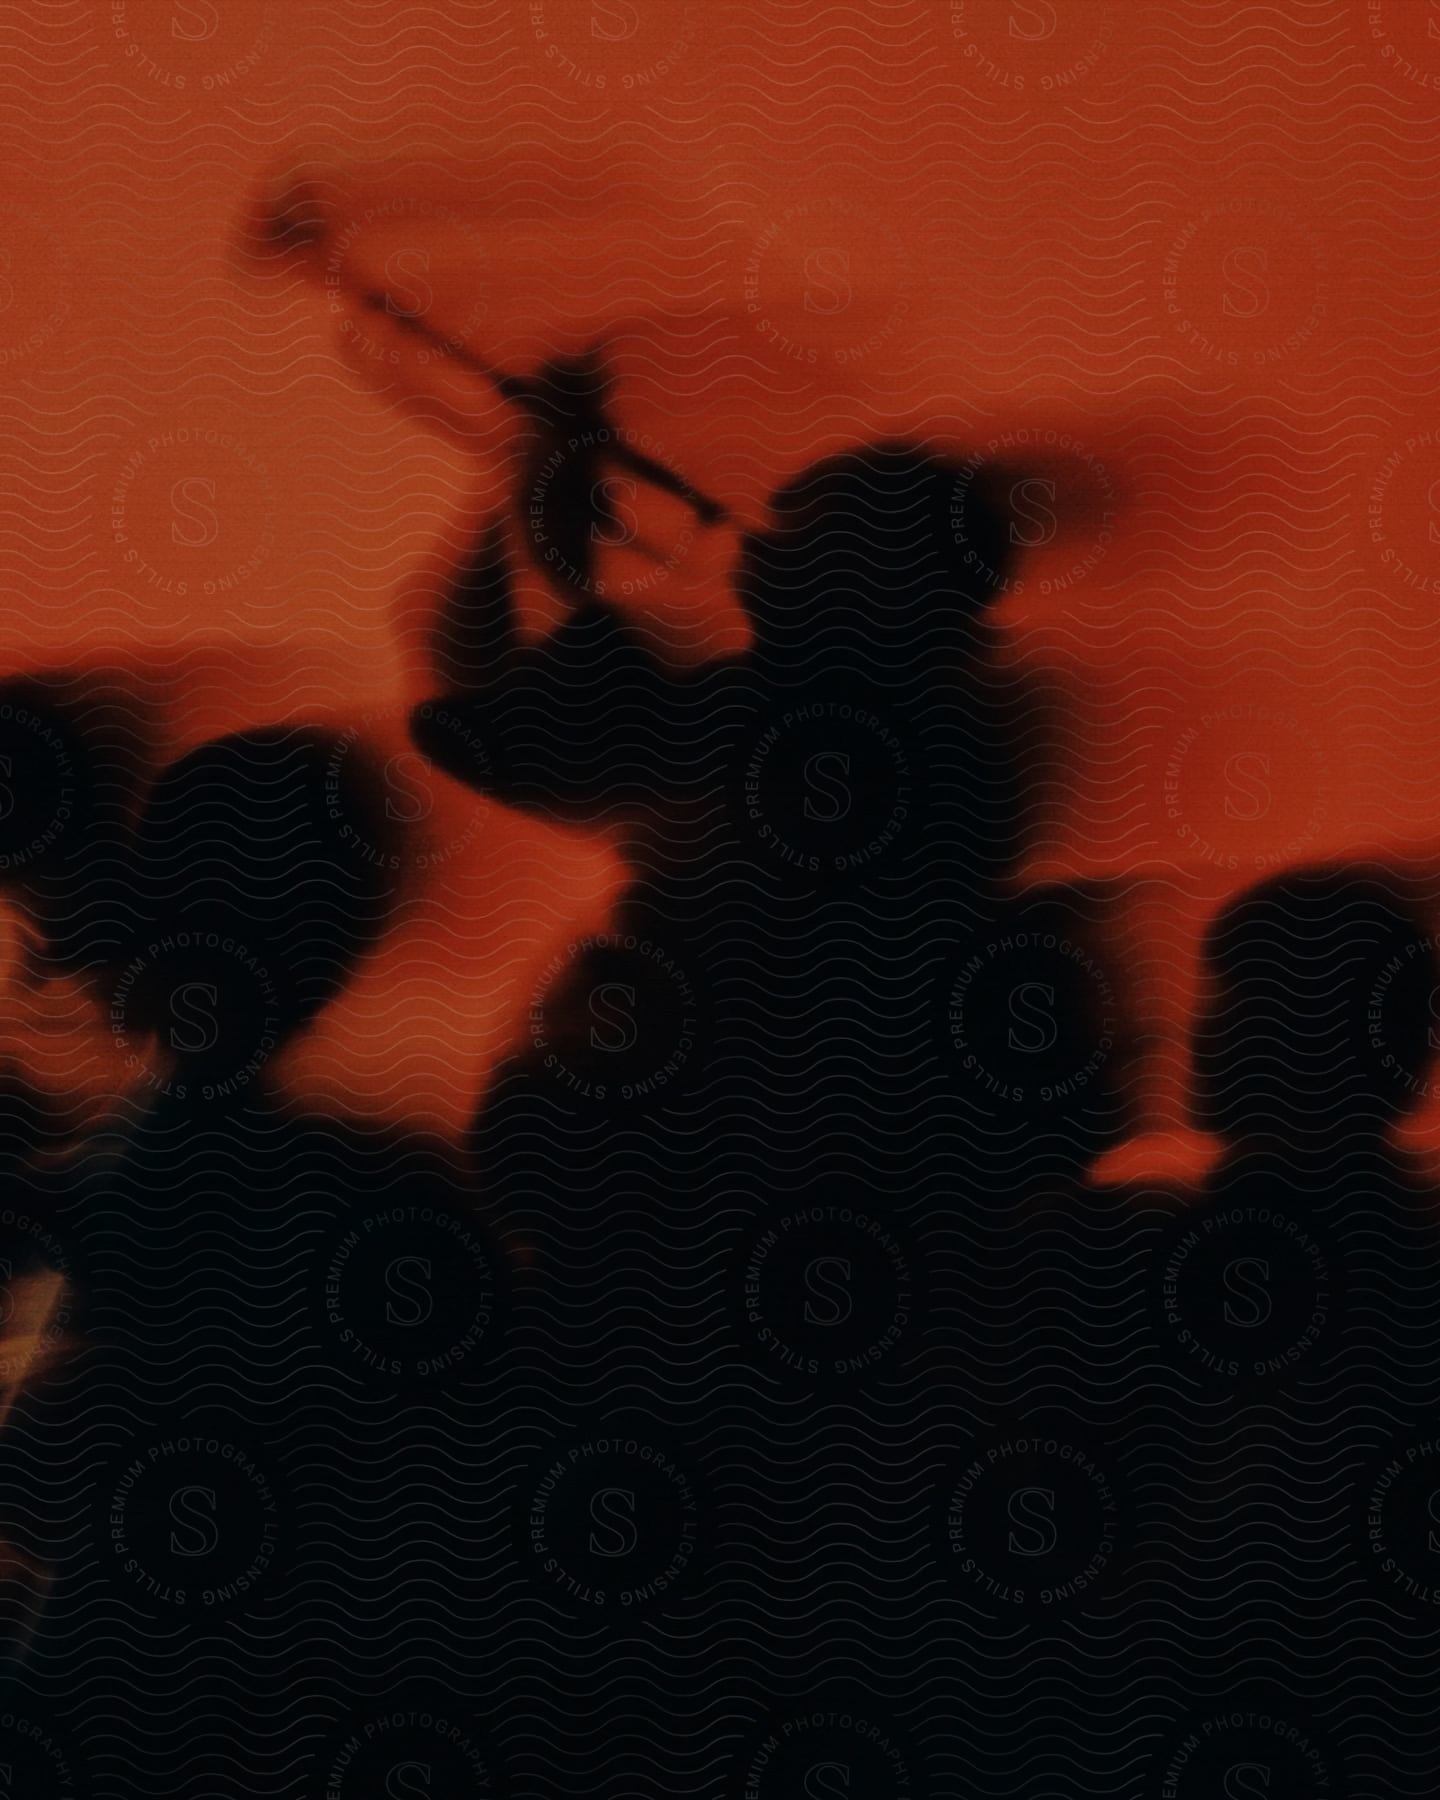 blurred abstract silhouettes of musicians performing against a red background